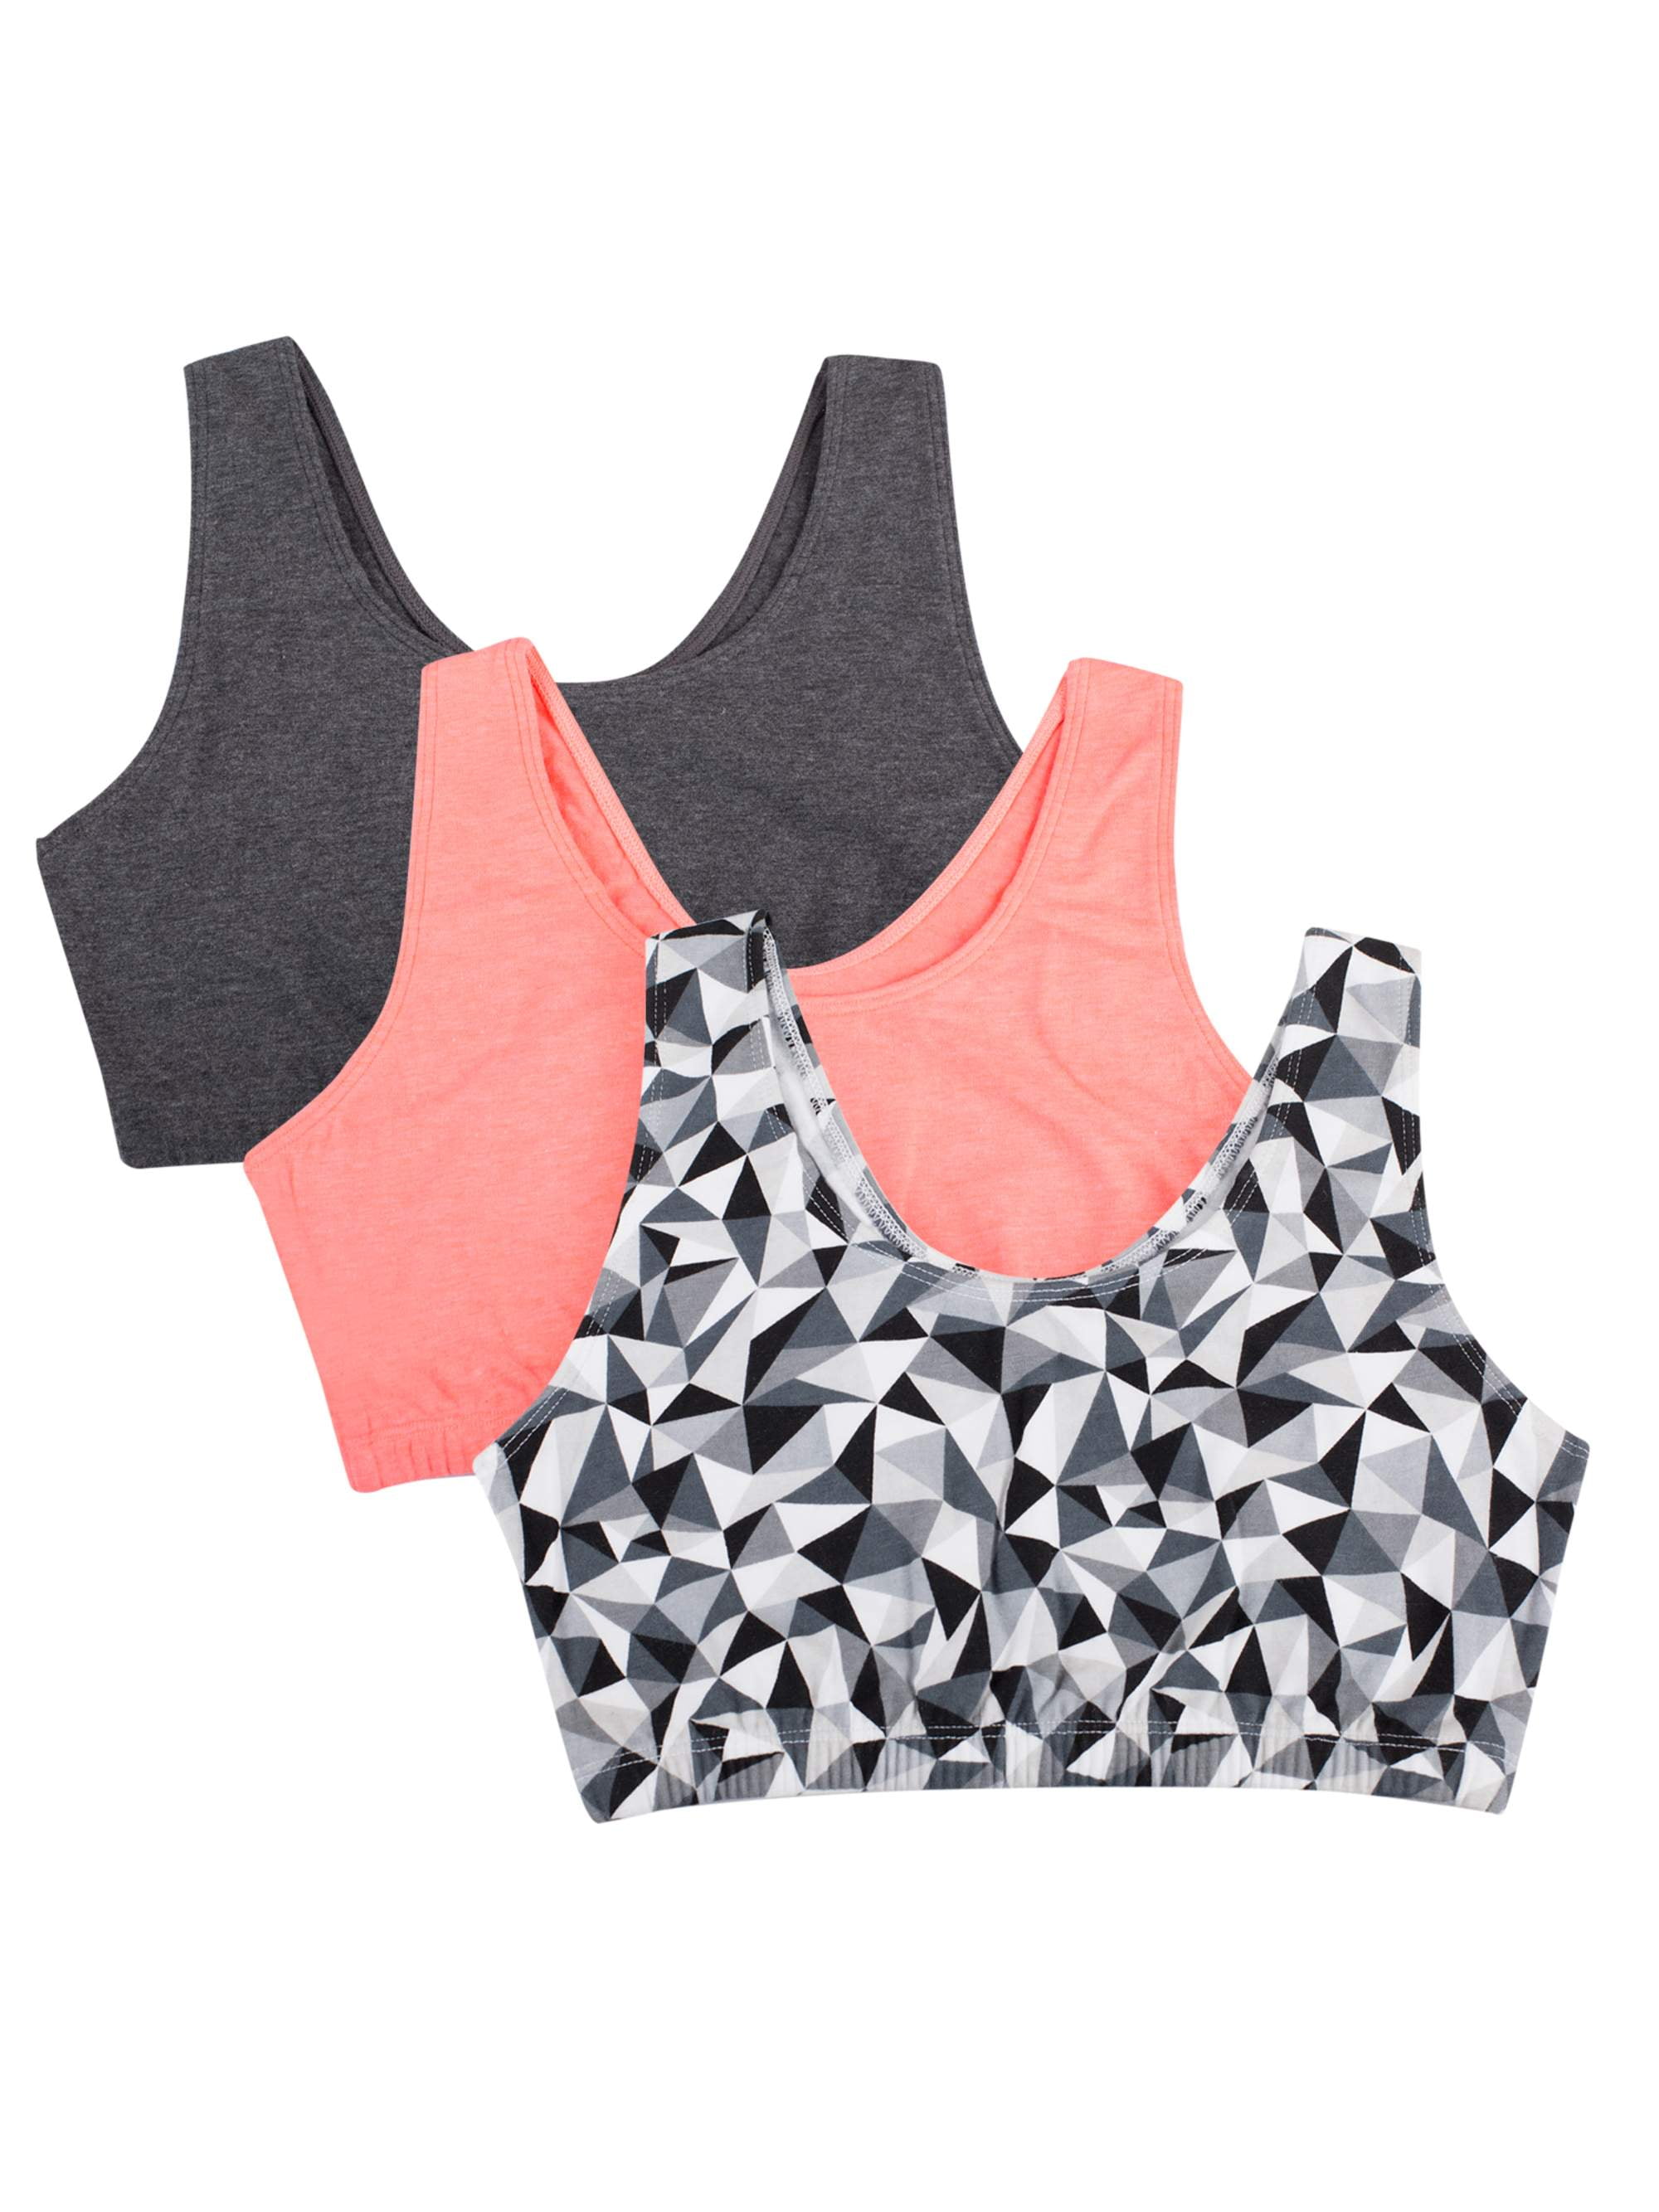 Fruit of the Loom Womens Built-up Sports Bra 3 Pack 